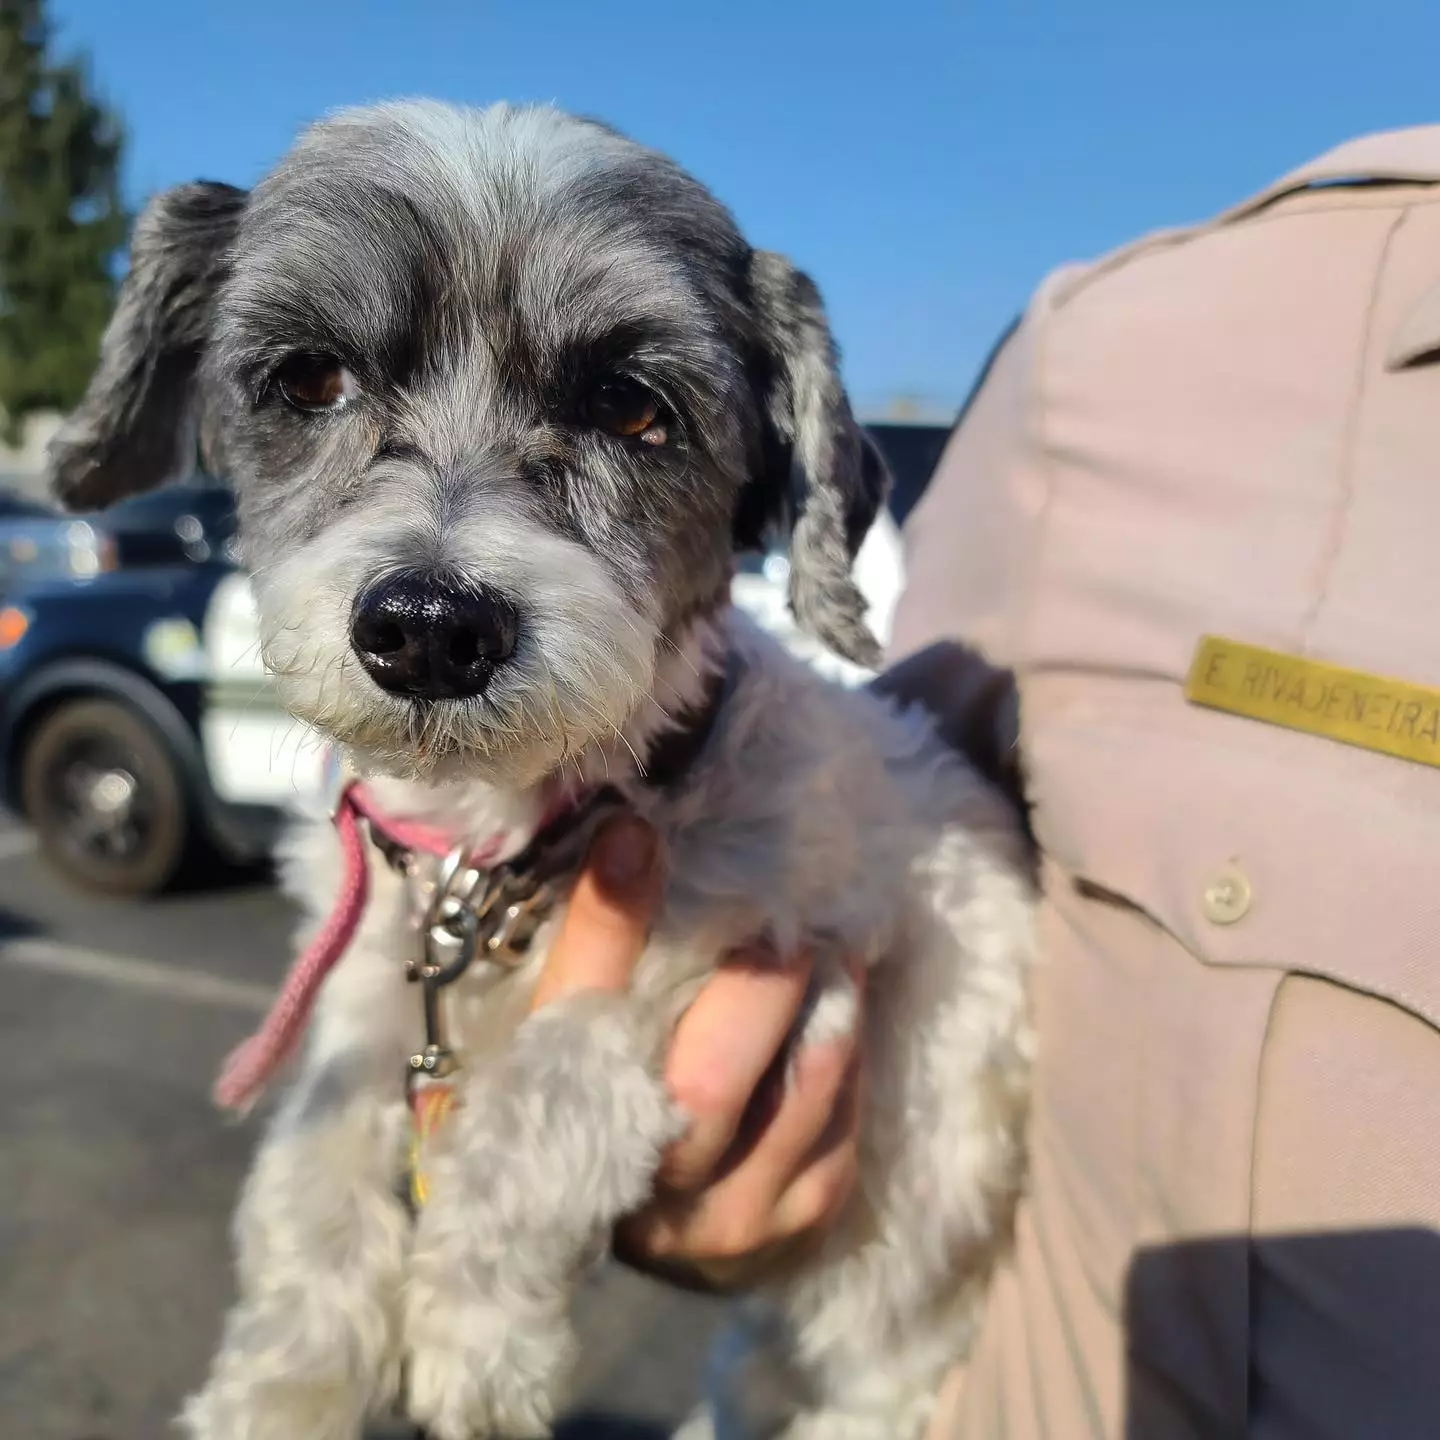 Little Boomer had to be saved from a hot car by a passer-by.